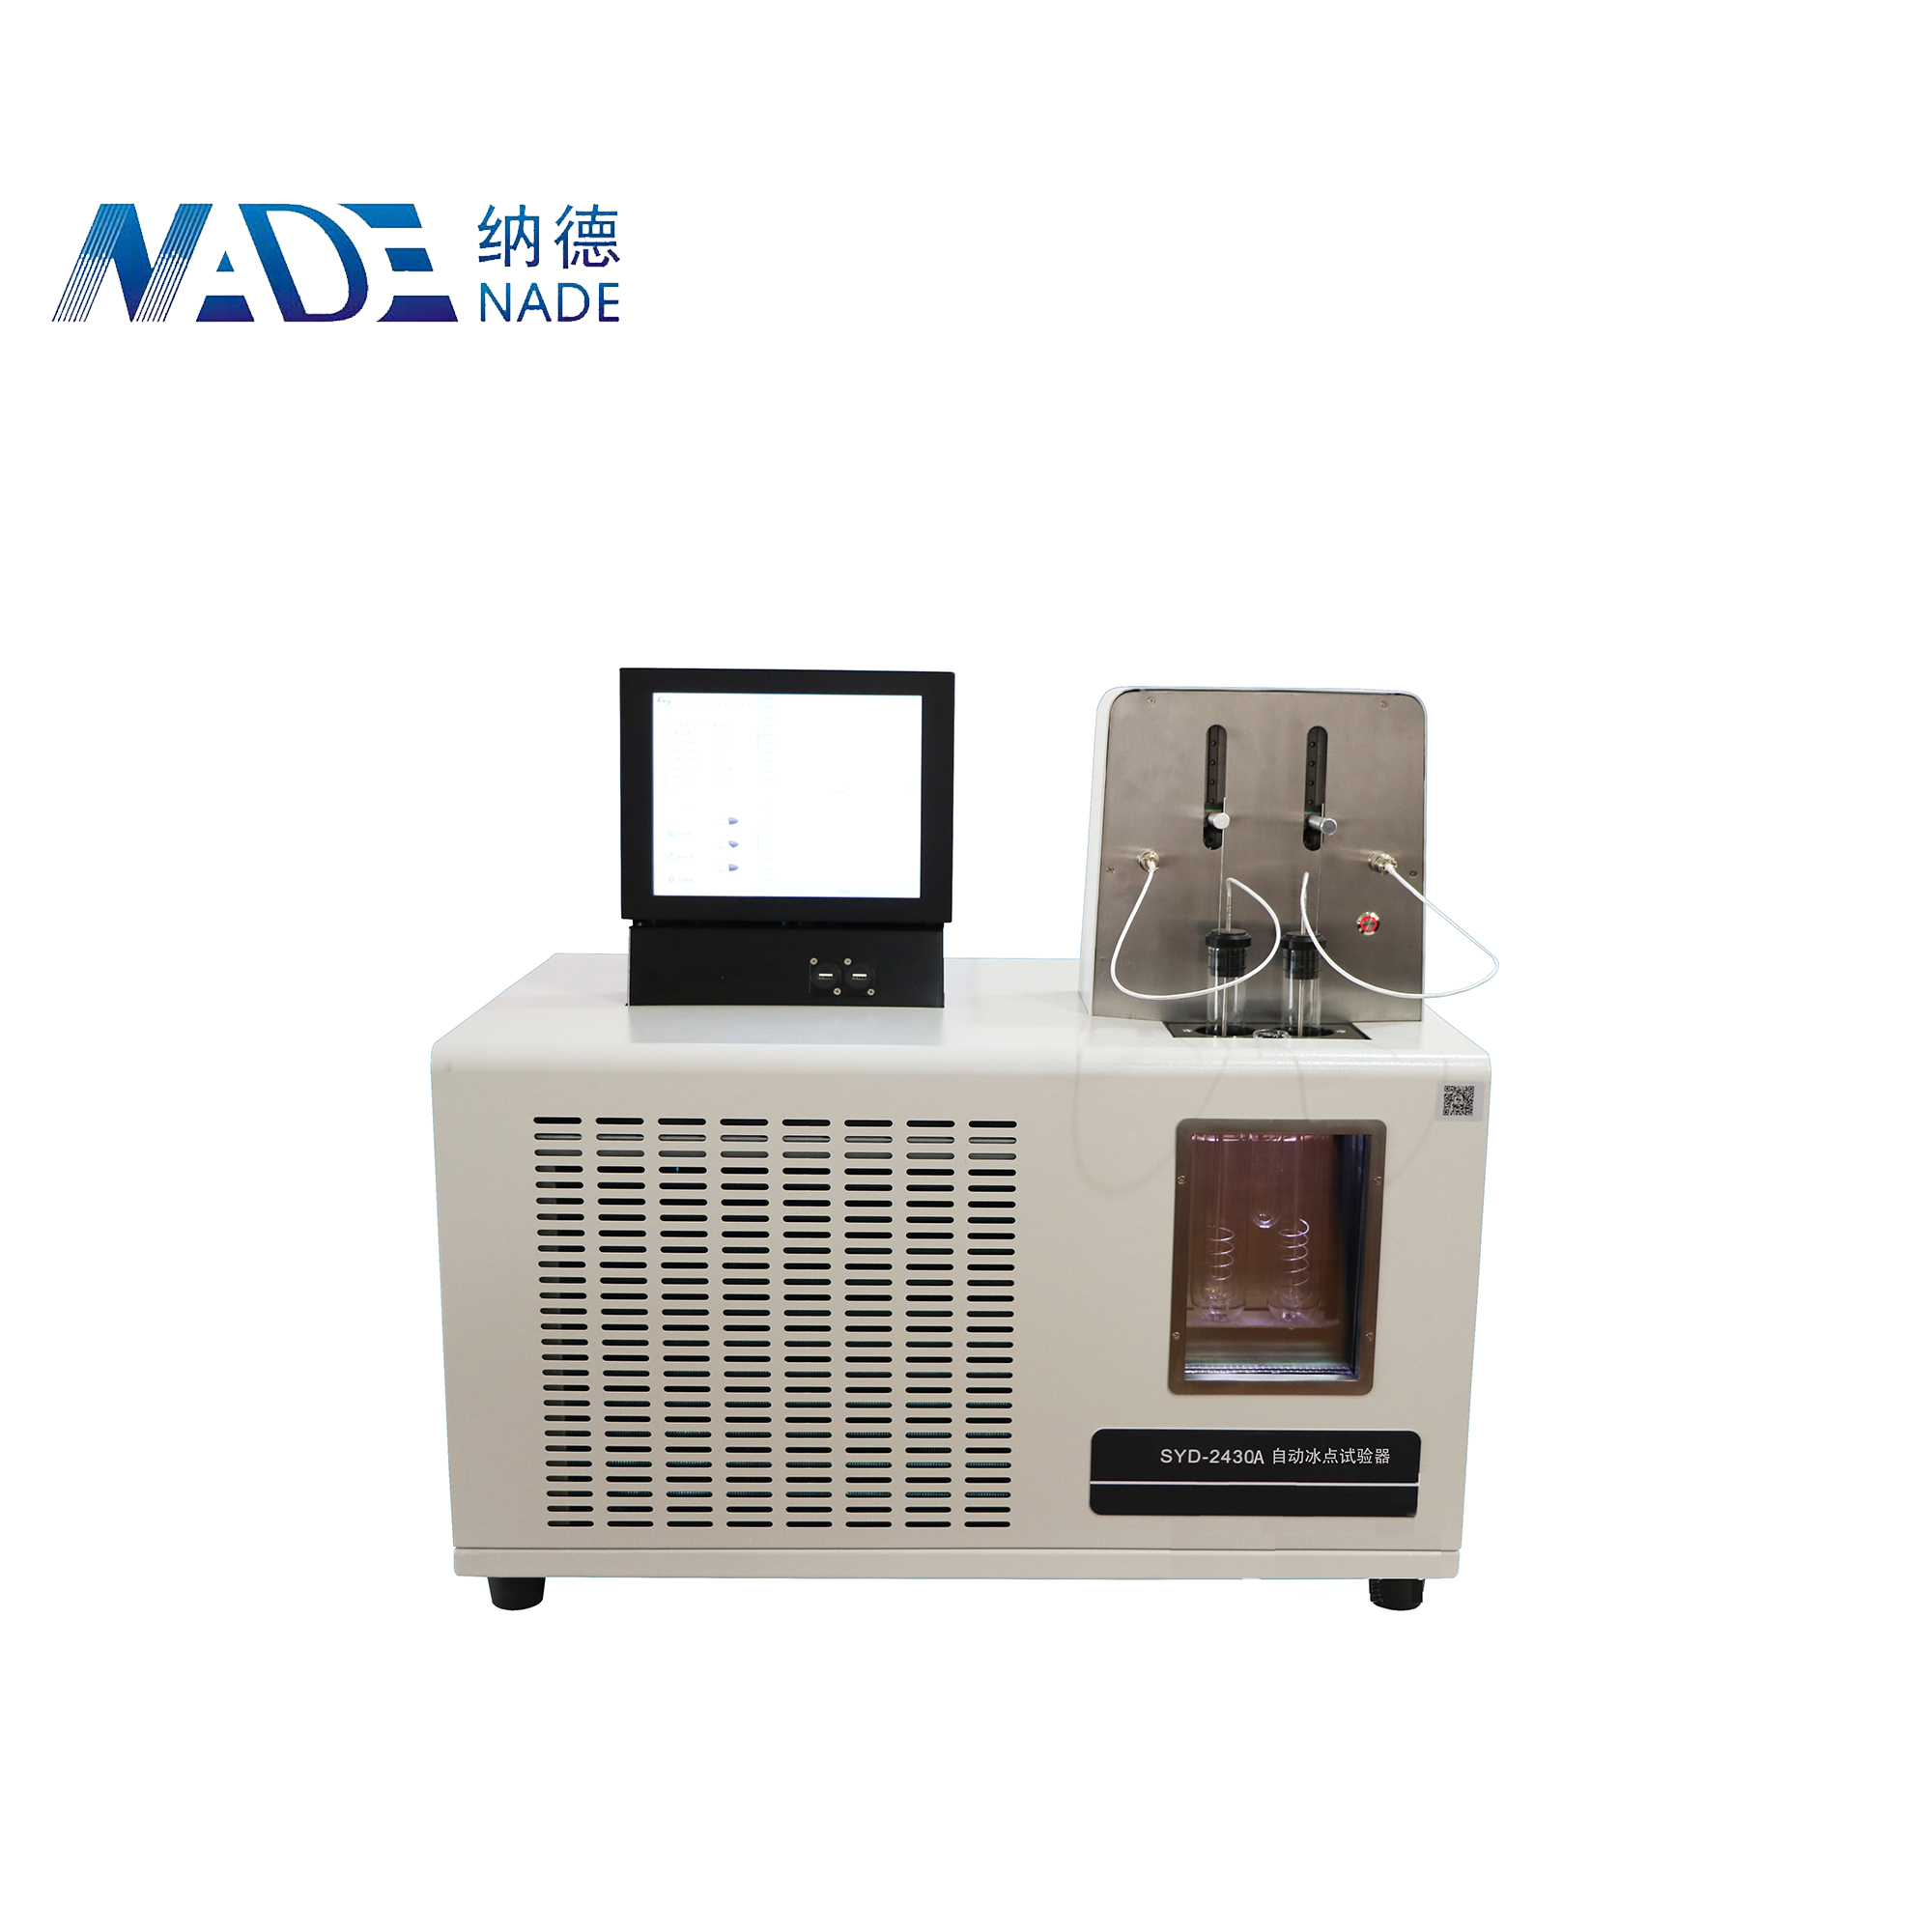 NADE SYD-2430A Laboratory Automatic Solidifying/Freezing Point Tester of petroleum products